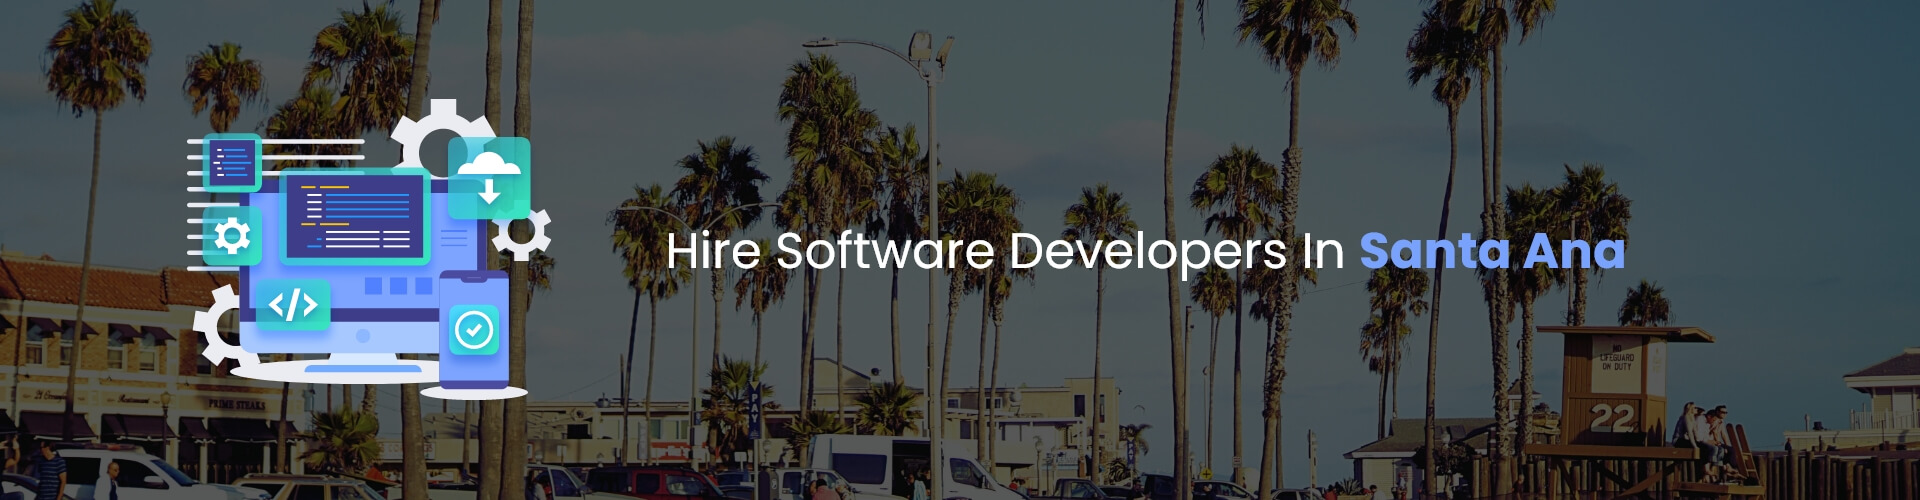 hire software developers in santa ana